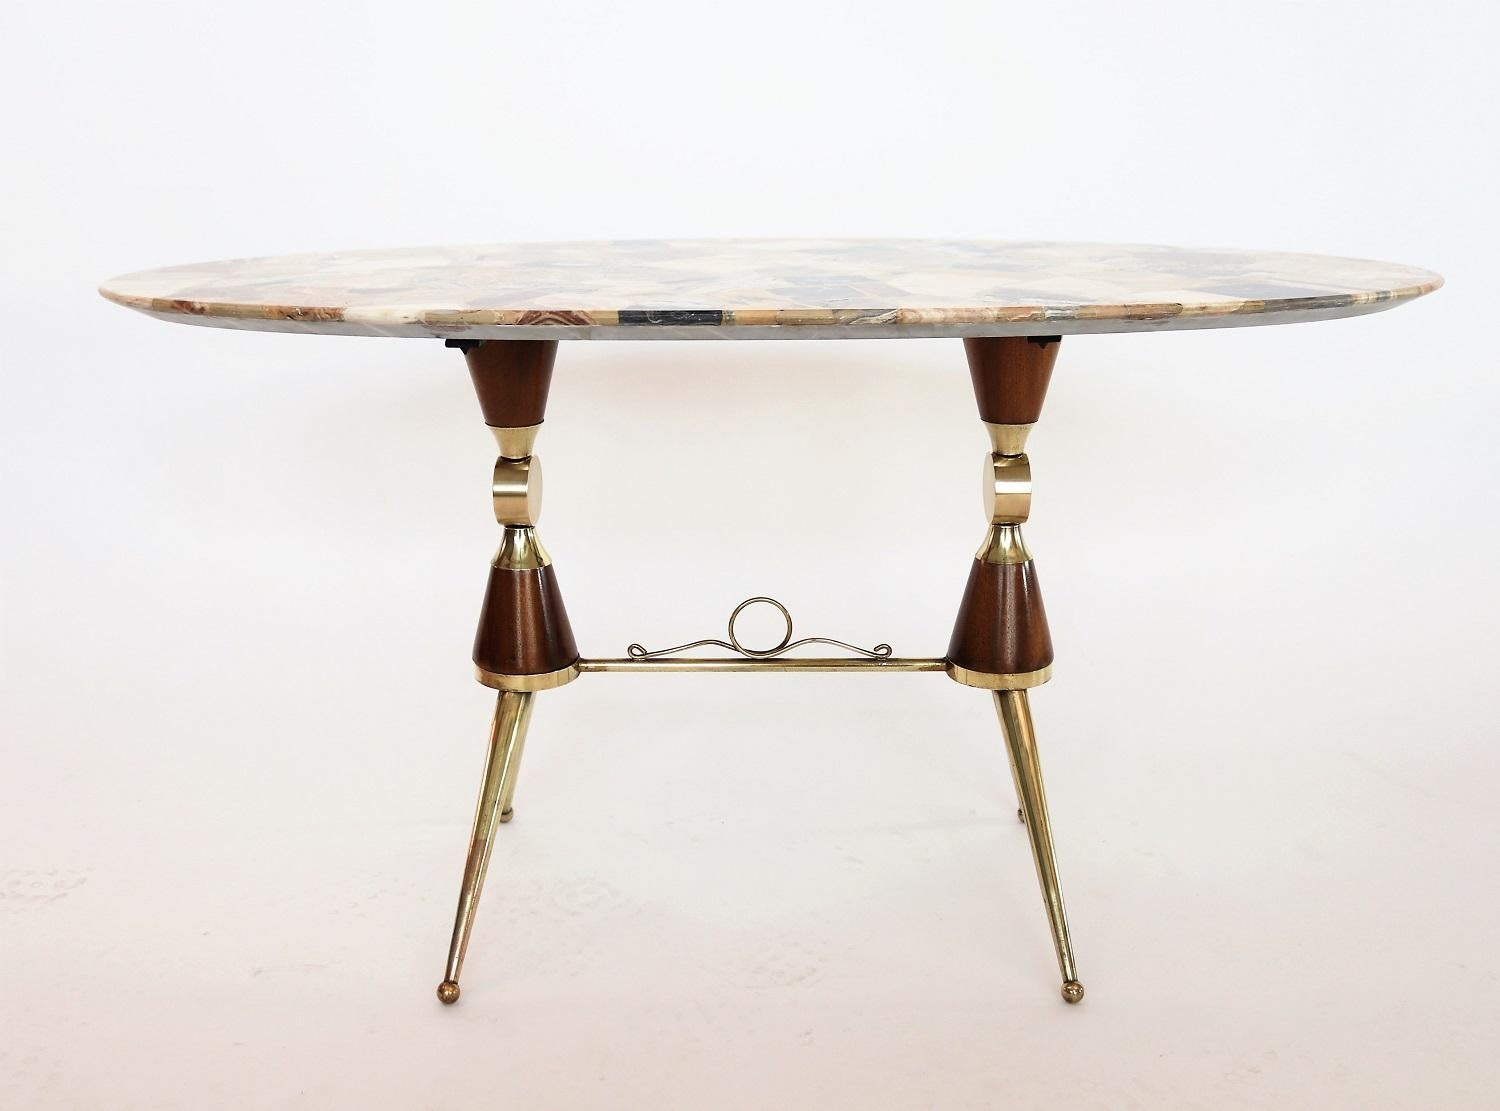 Polished Italian Midcentury Coffee Table with Marble Mosaic, Brass and Mahogany, 1950s